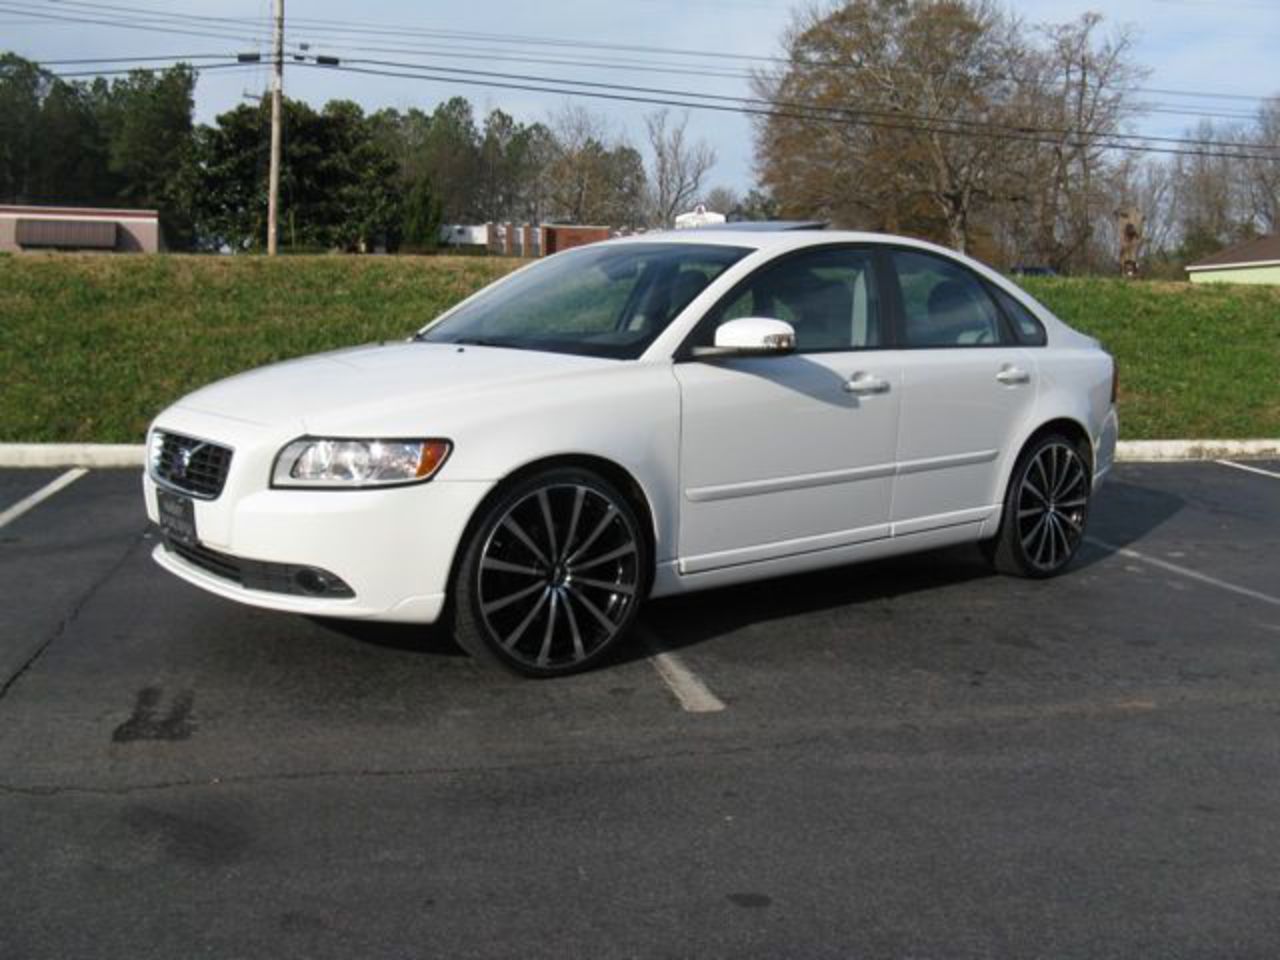 Additional images of this Volvo S40 and many more are available for viewing